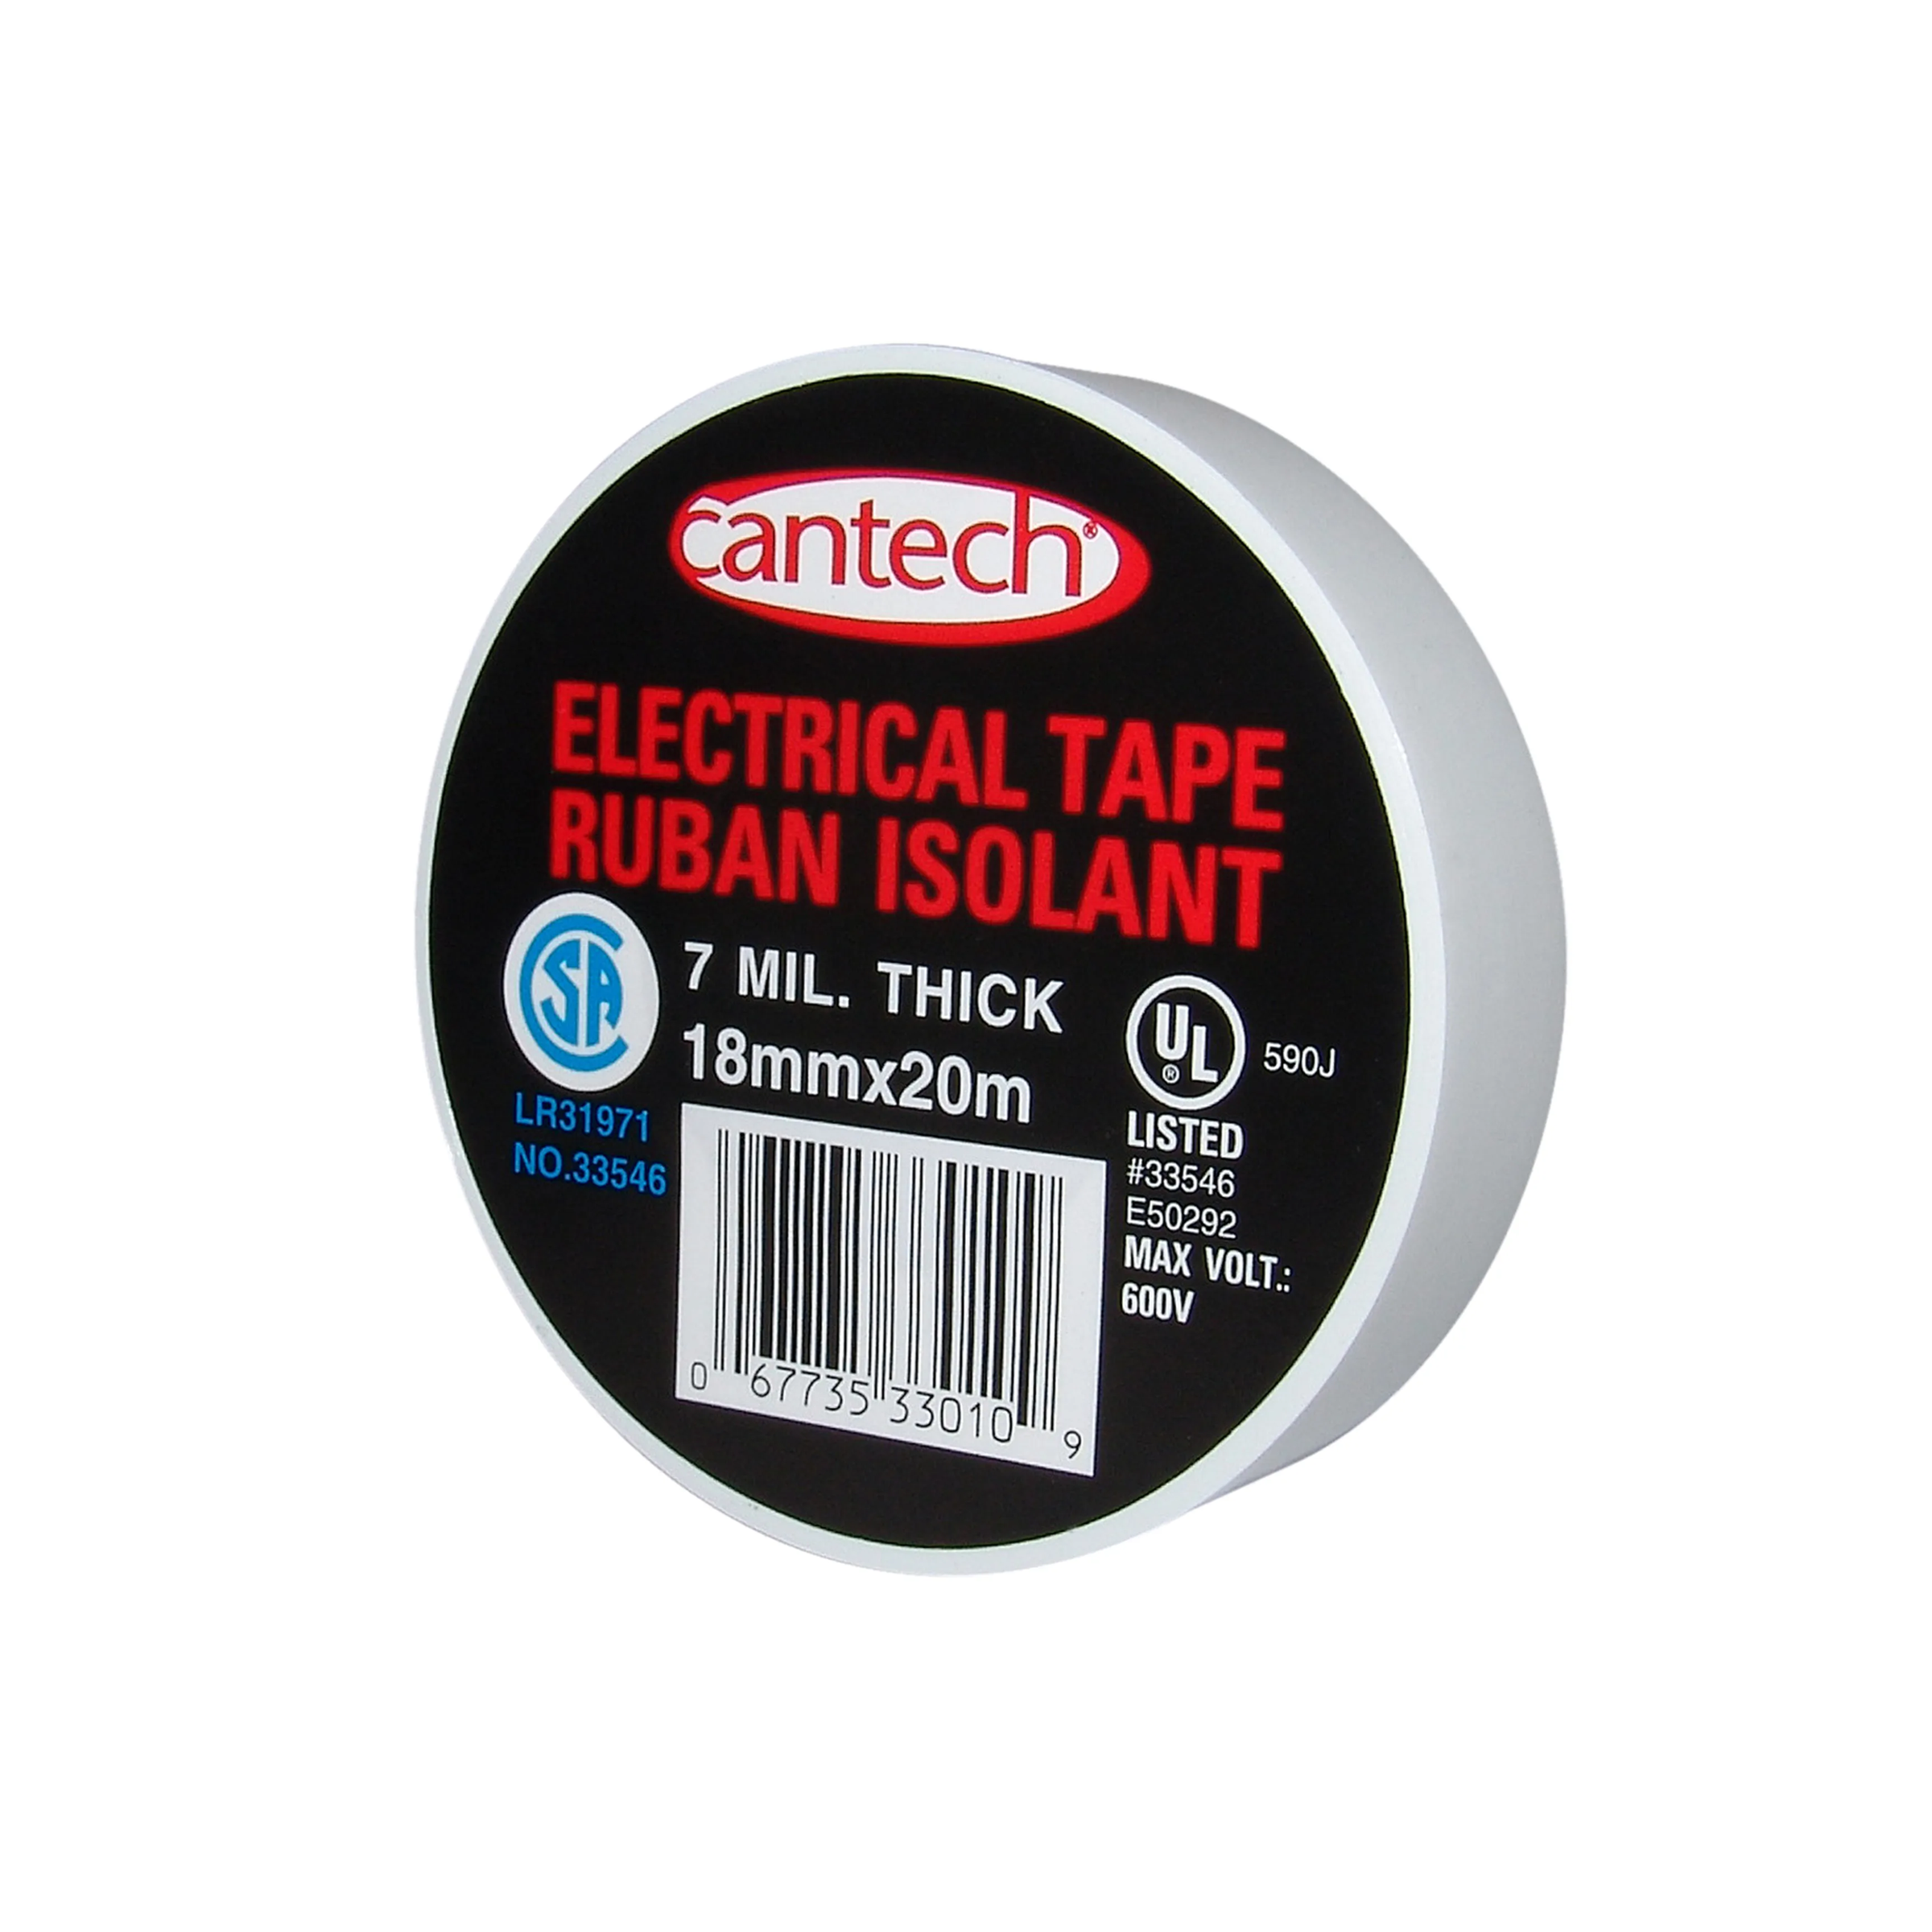 18mm x20m Electrical Tape, White